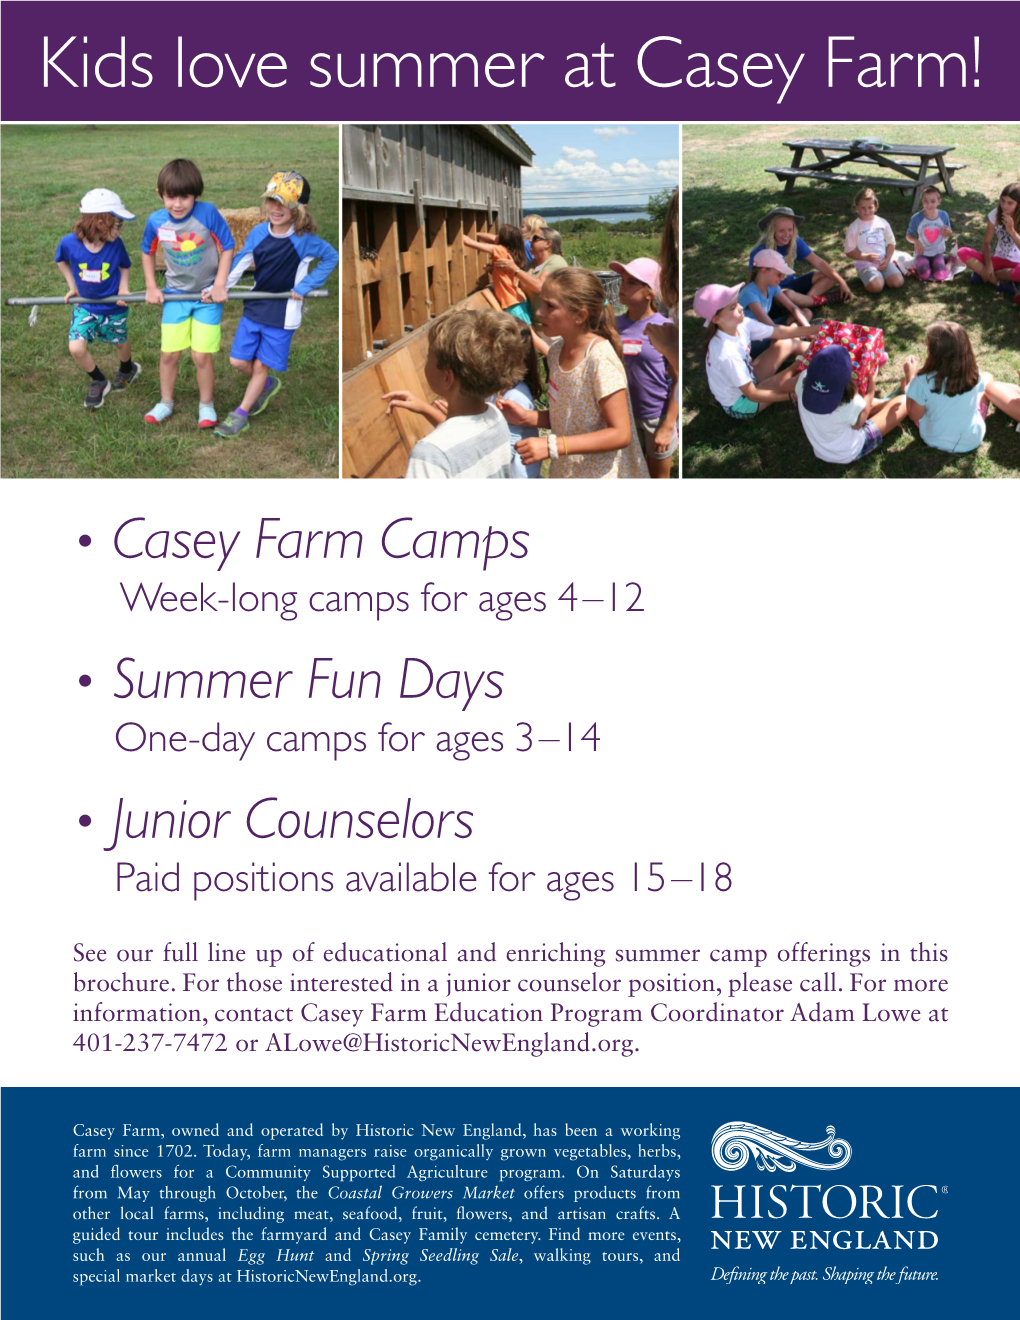 Casey Farm Camps Week-Long Camps for Ages 4 –12 • Summer Fun Days One-Day Camps for Ages 3 –14 • Junior Counselors Paid Positions Available for Ages 15 –18